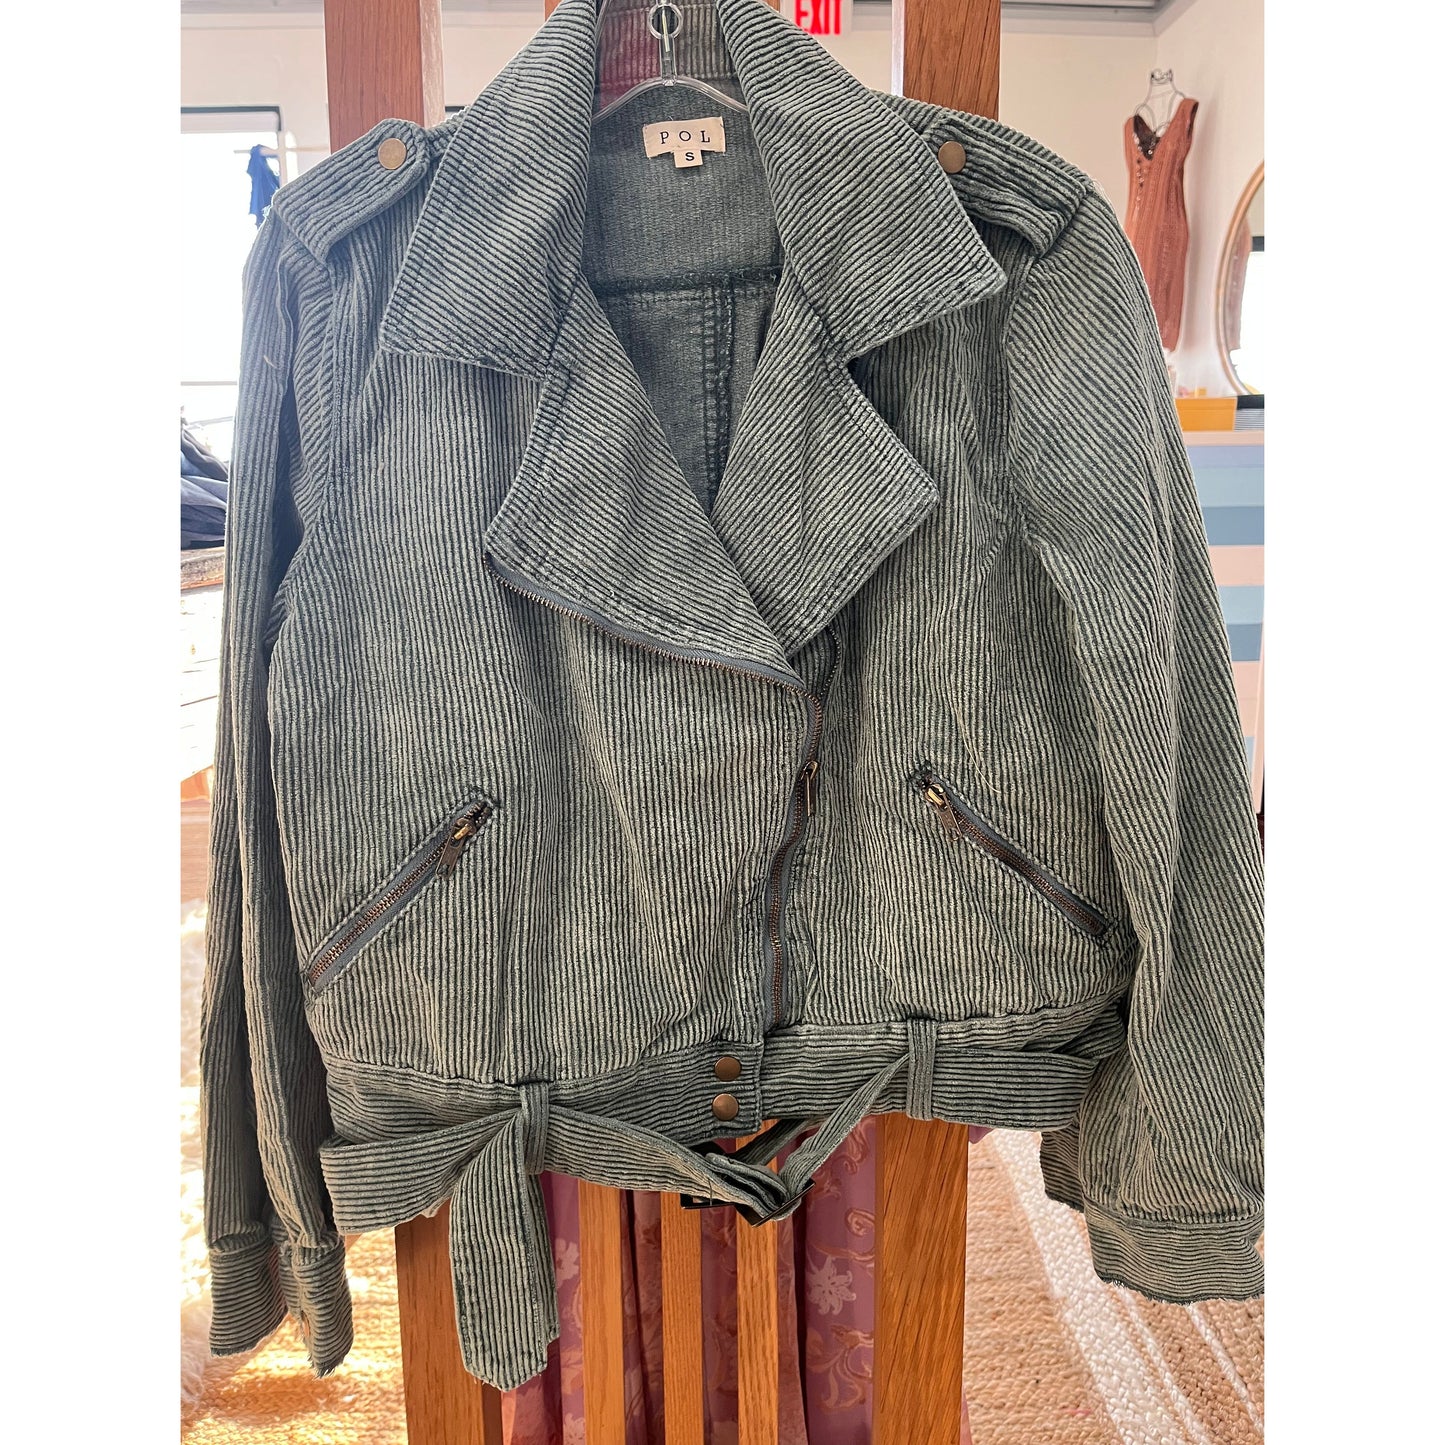 Hunter Green, Corduroy Jacket with diagonal zipper detail going from the left hip to the right shoulder. The bottom of the jacket features two stacked silver buttons on either side of the front opening below the zipper. Belt loops attached around the base hem with a tie belt. There are 2 diagonal pockets on either side of the jacket. Large double flaps are featured on the front, 100% Cotton. Available in sizes Small - Large